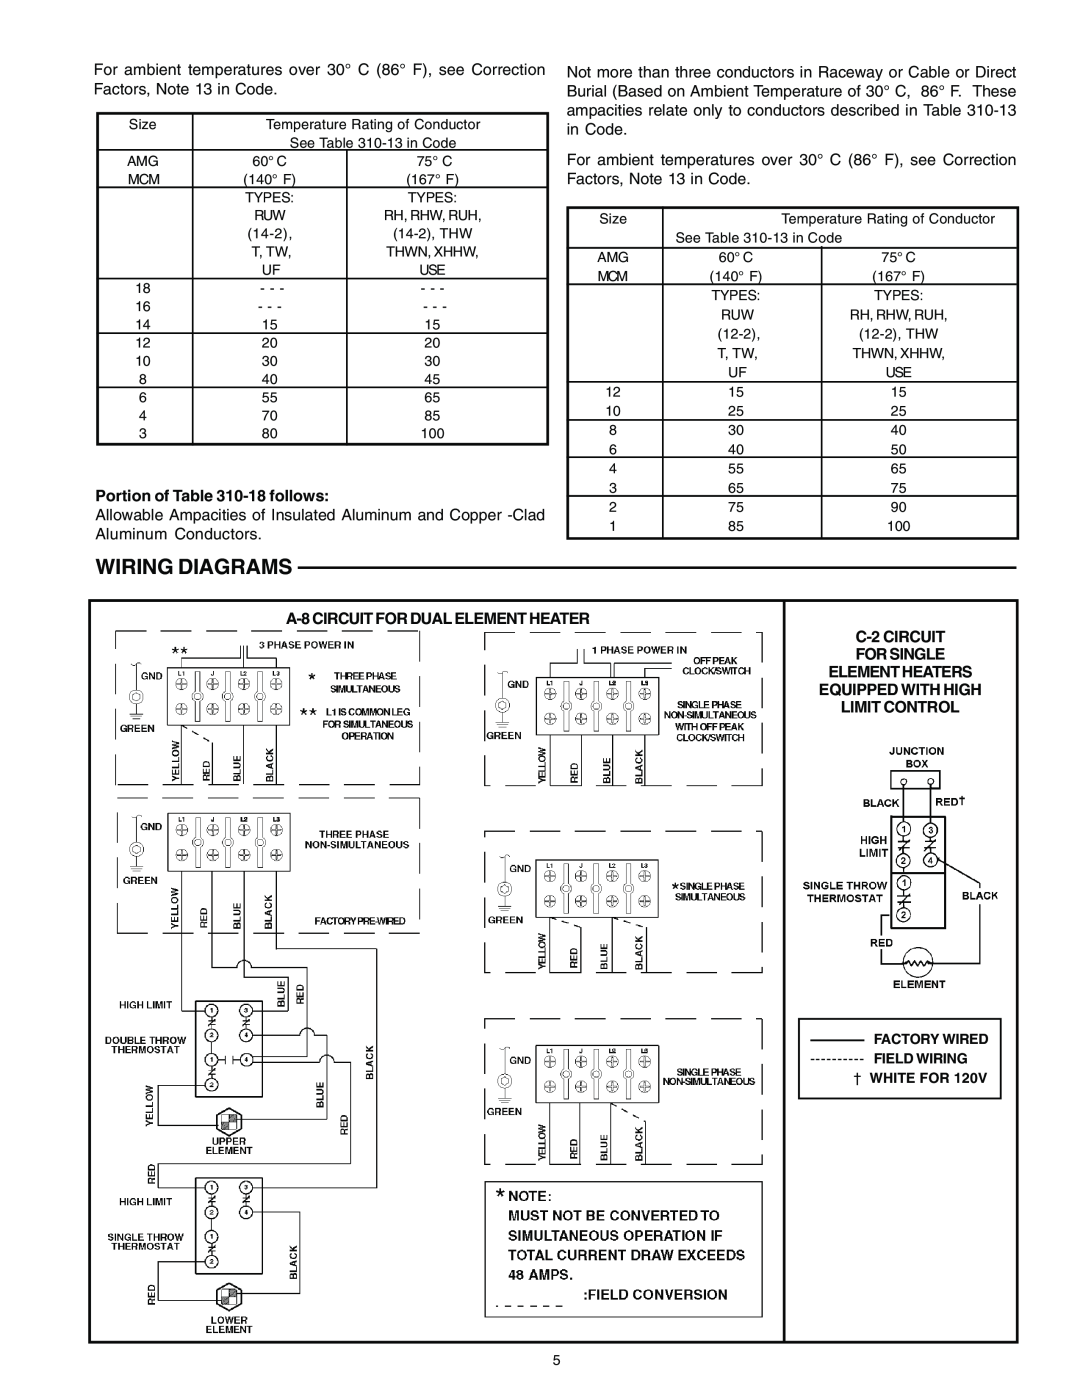 A.O. Smith DEL, DEN Wiring Diagrams, Portion of -18 follows, A-8 CIRCUIT FOR DUAL ELEMENT HEATER C-2 CIRCUIT FOR SINGLE 